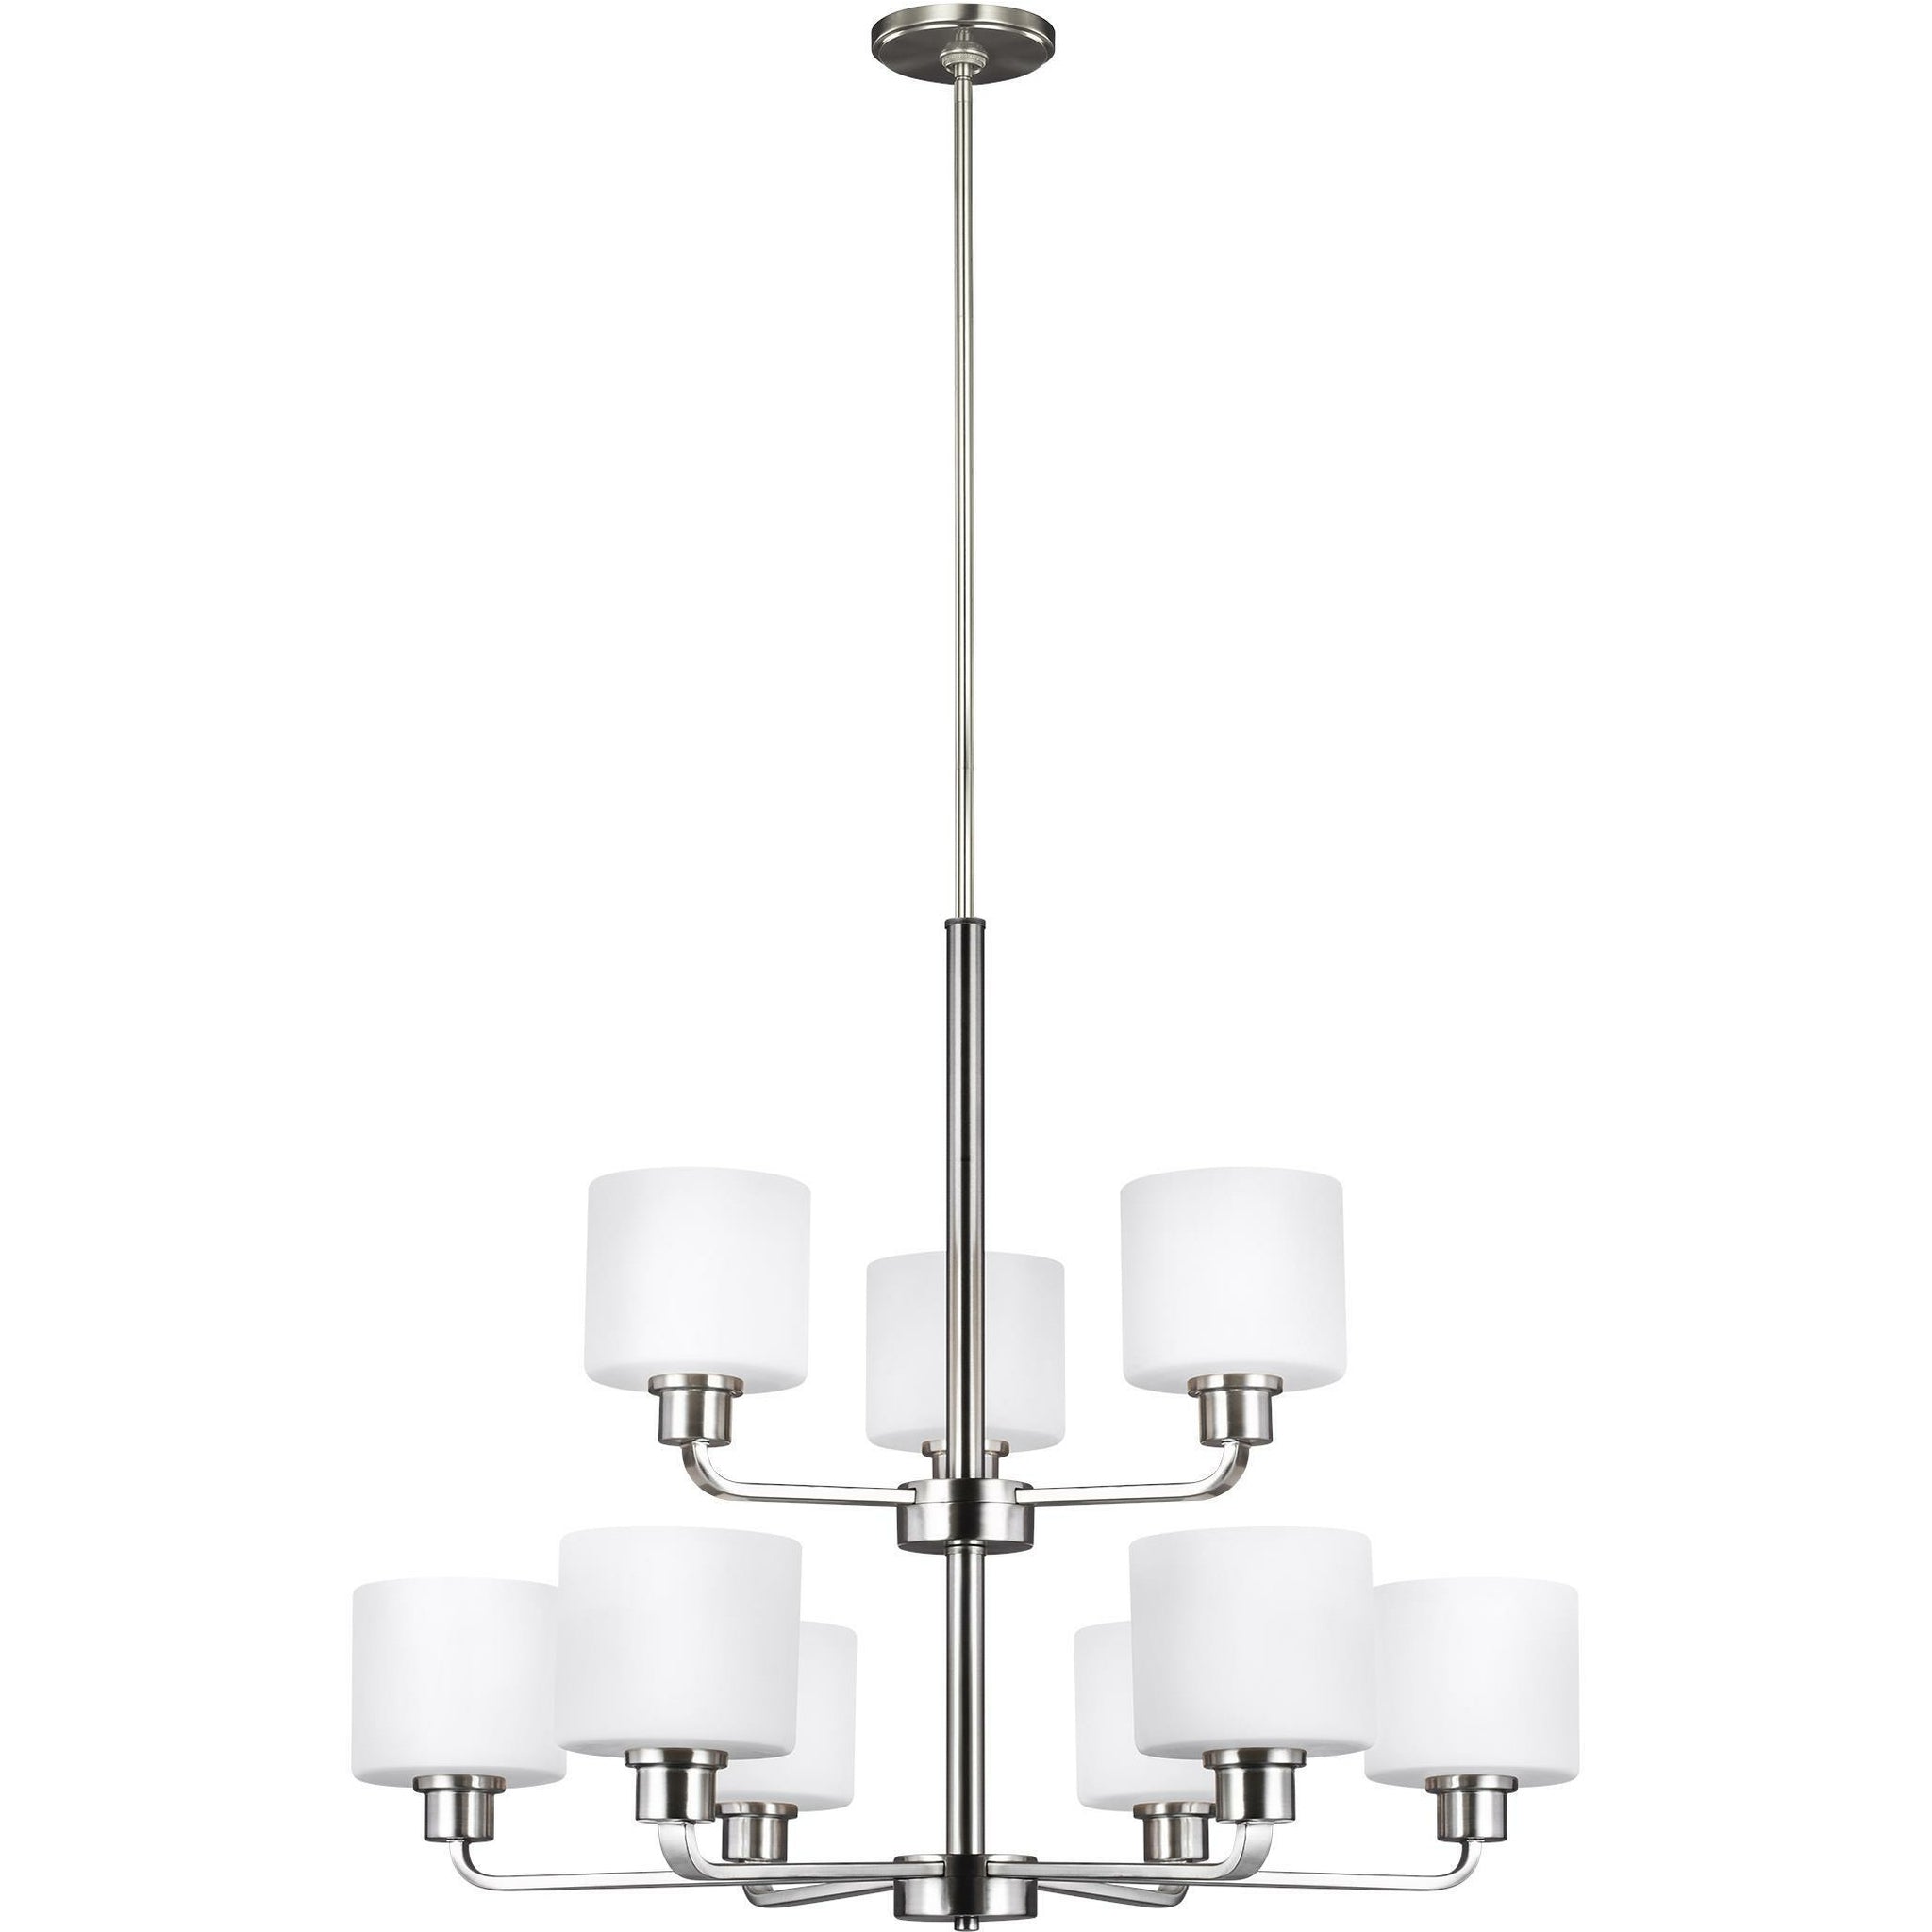 Canfield Chandelier Brushed Nickel